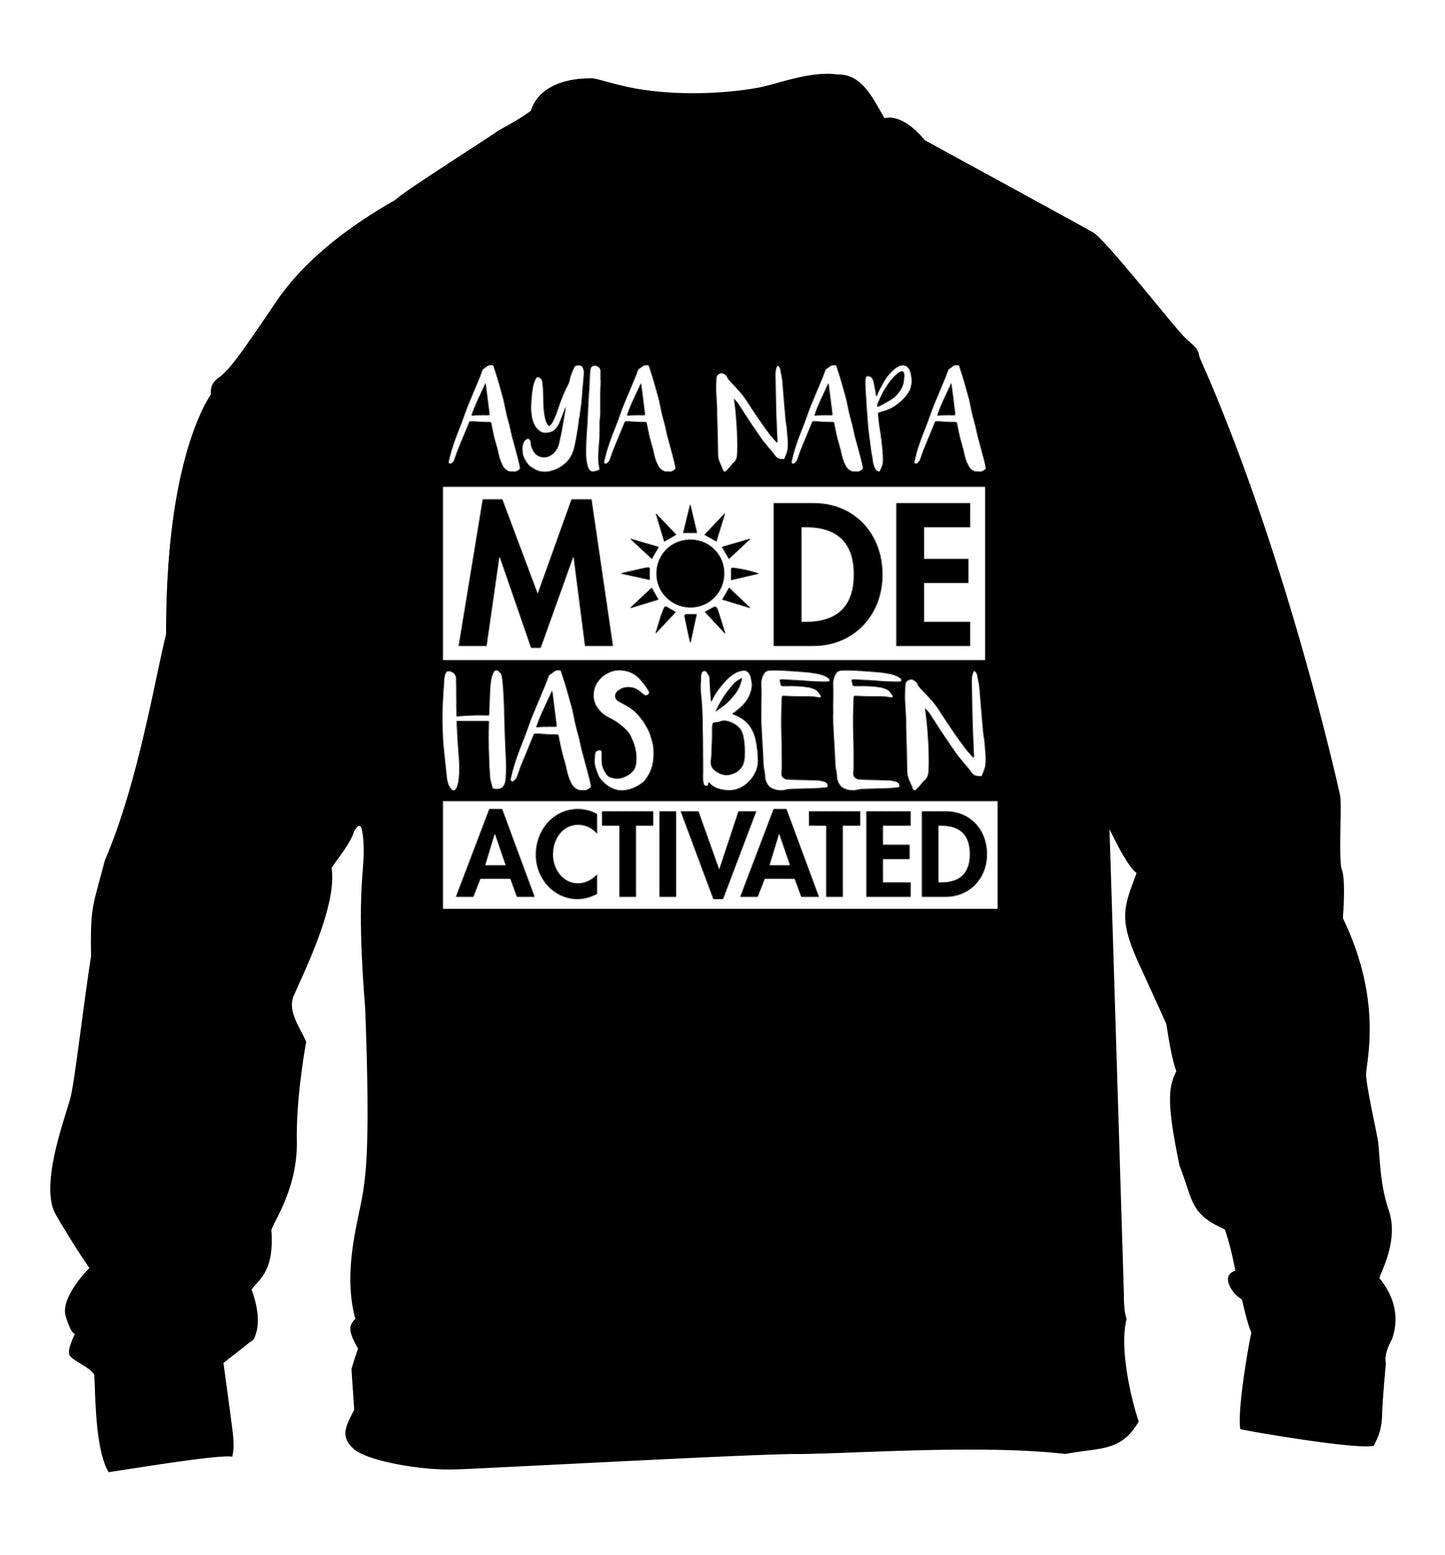 Ayia Napa mode has been activated children's black sweater 12-13 Years